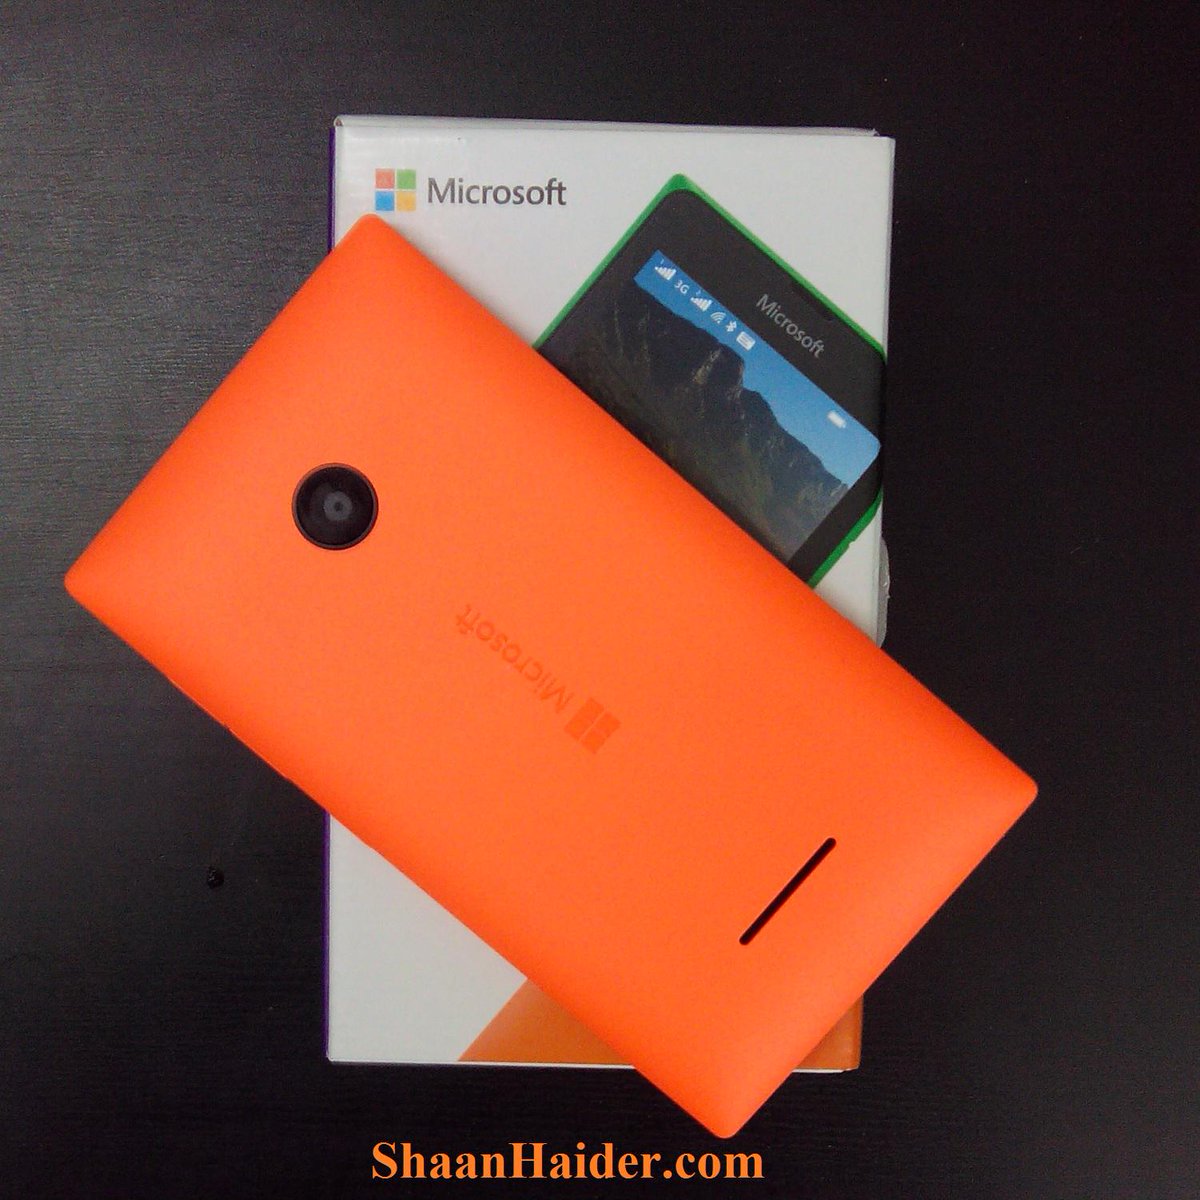 Microsoft Lumia 435 and Lumia 435 Dual SIM : Hands-on Review, Specs and Features